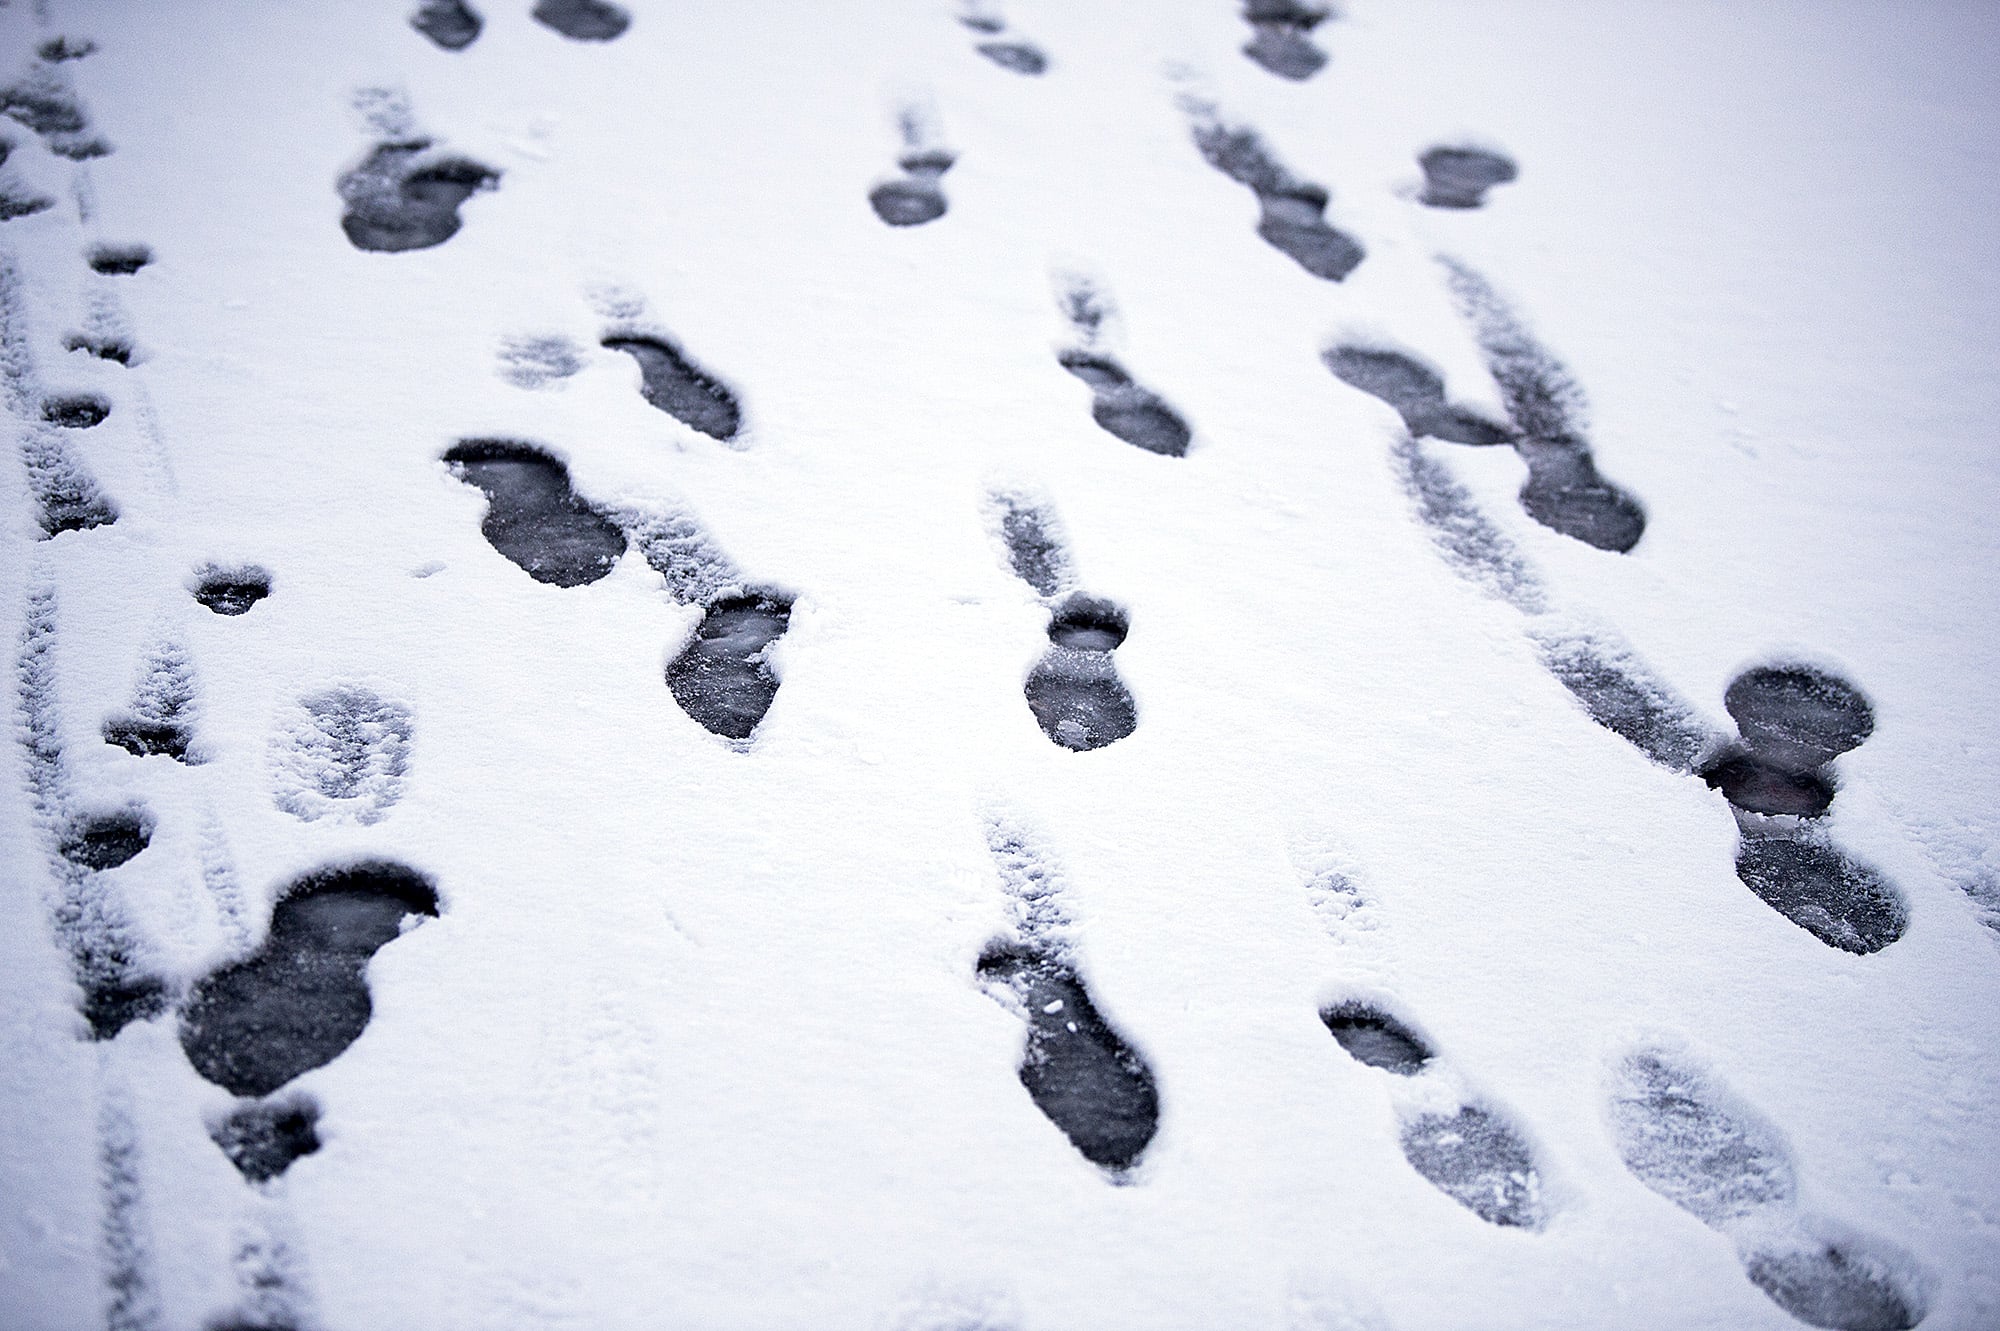 Footprints are seen in a small accumulation of snow in Cascade Park on Tuesday morning, Feb. 5, 2019.